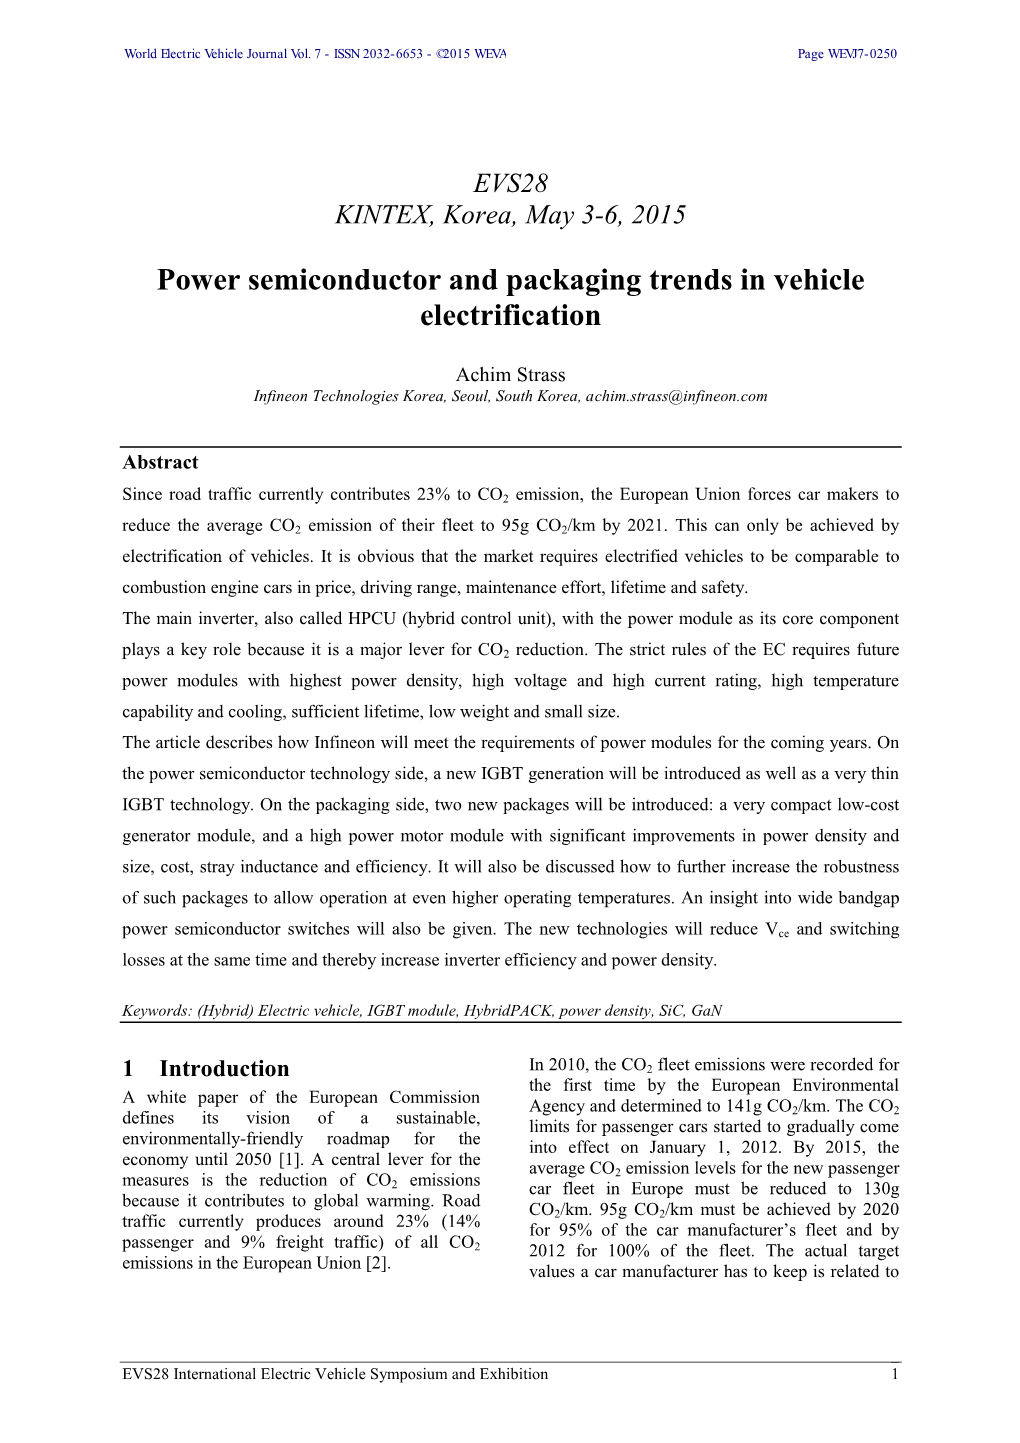 Power Semiconductor and Packaging Trends in Vehicle Electrification